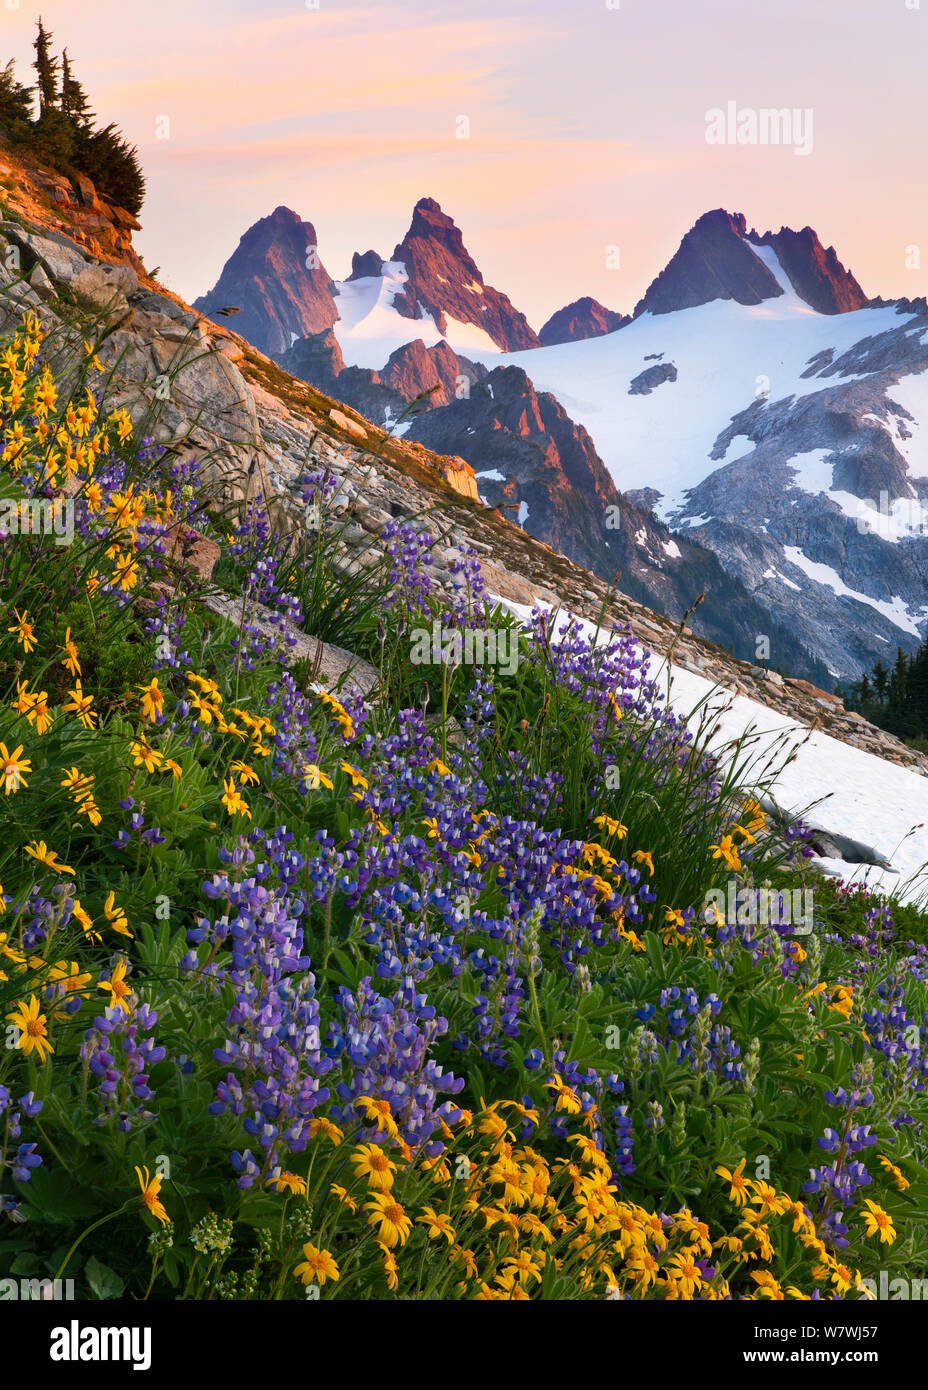 Subalpine flowers including  Lupins  in the Alpine Lakes Wilderness in the Cascades with Chimney Peak in the distance, Washington, USA. Composed of several stacked images. August 2012. Stock Photo